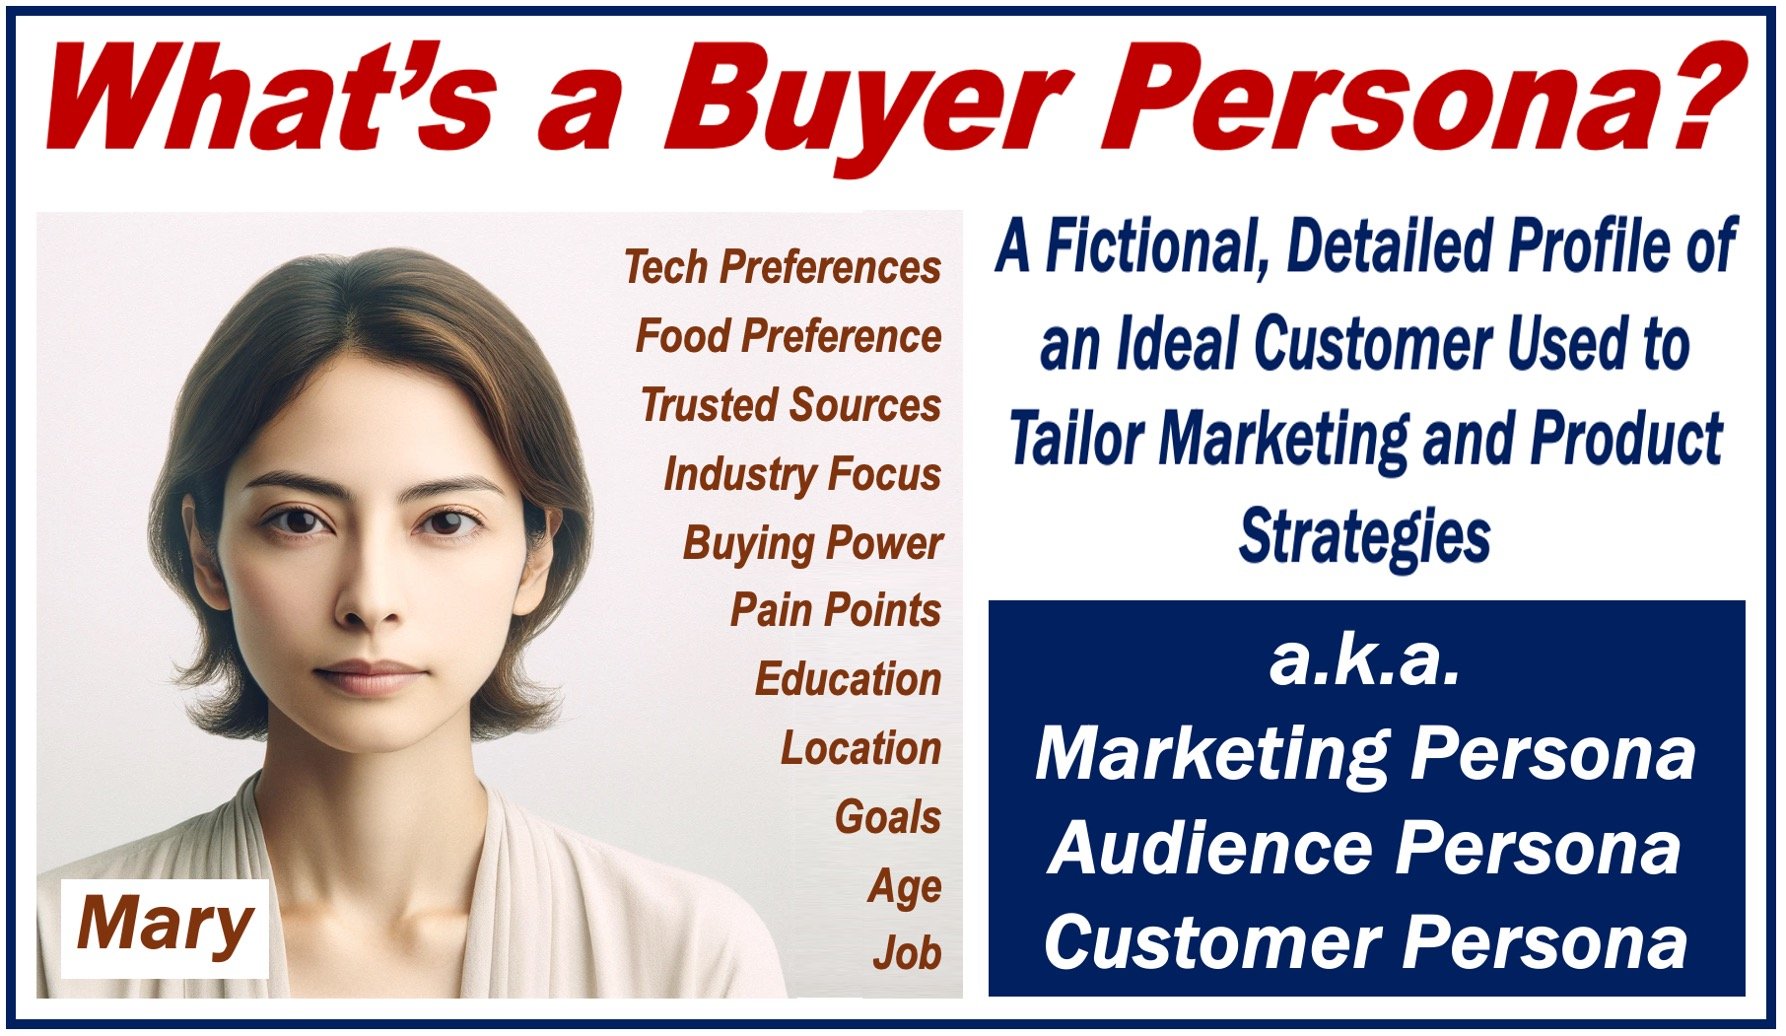 Image of a woman and a definition of a BUYER PERSONA